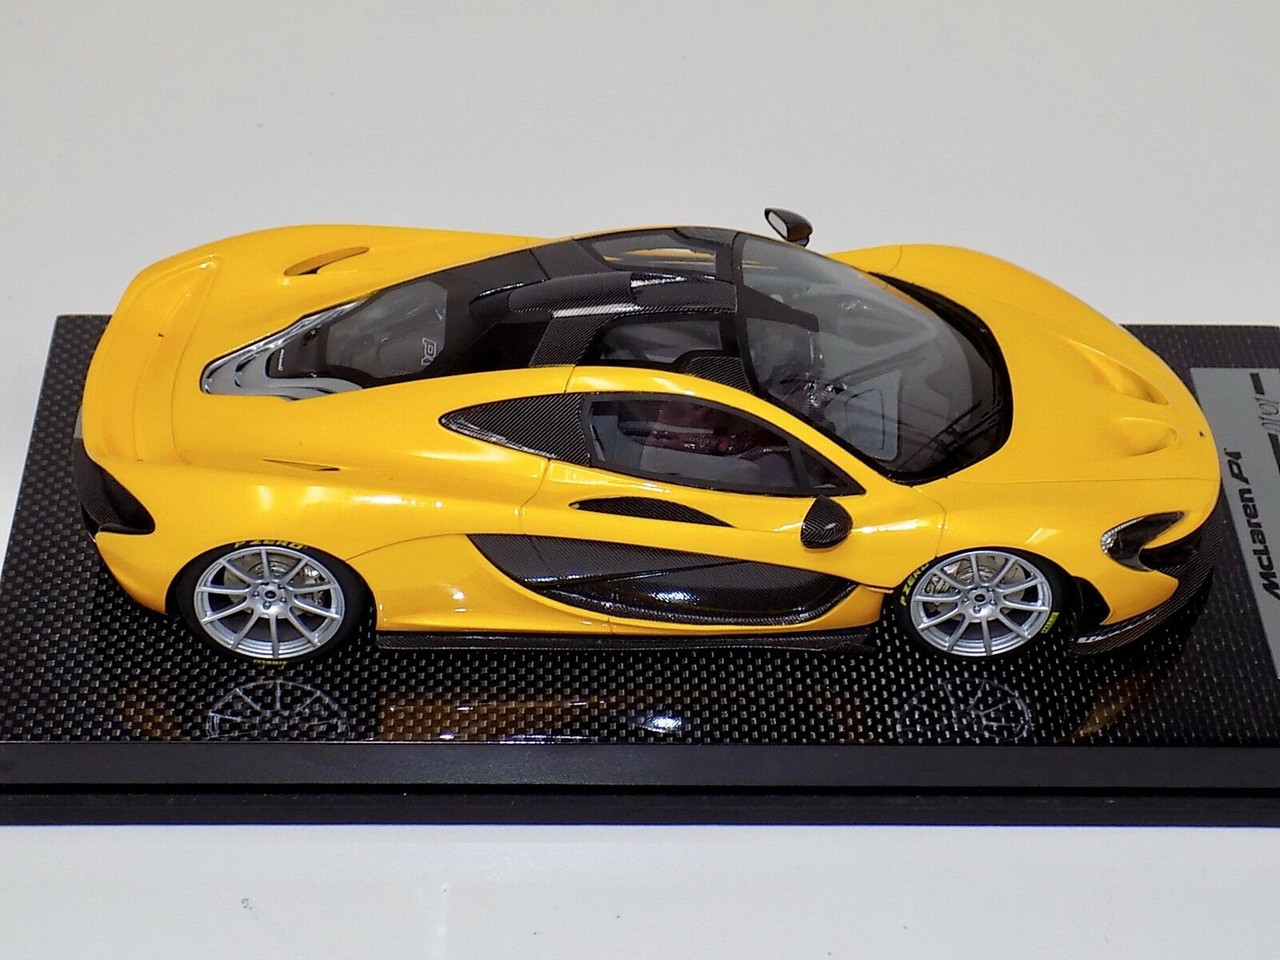 1/18 Tecnomodel McLaren P1 (Gloss Yellow with Silver wheels) with Carbon Base Resin Car Model Limited 01/01